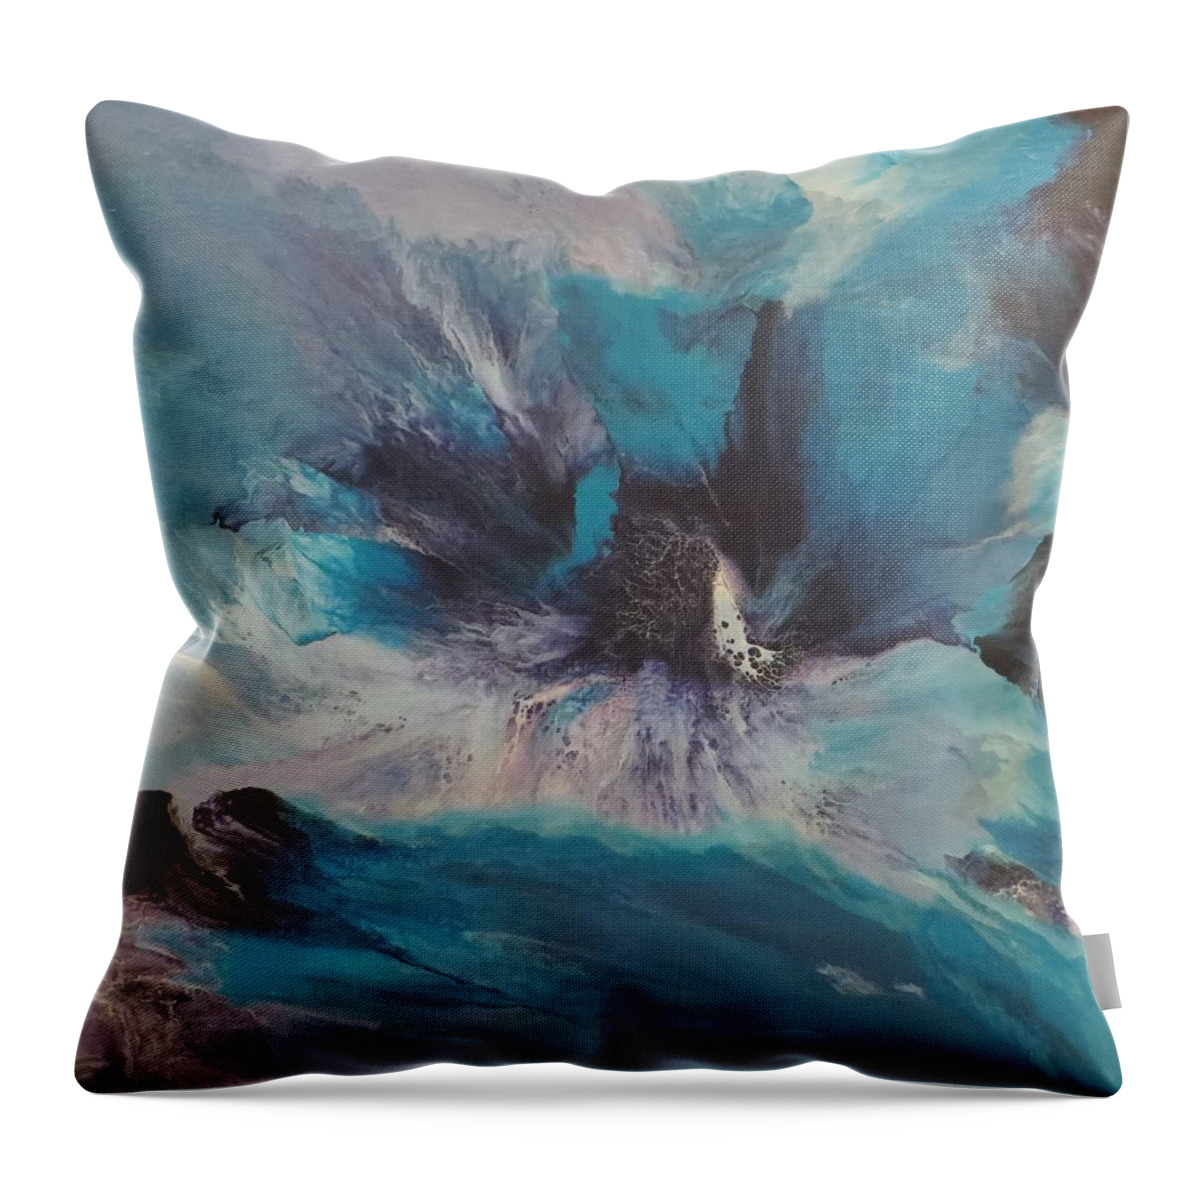 Abstract Throw Pillow featuring the painting Resolve by Soraya Silvestri